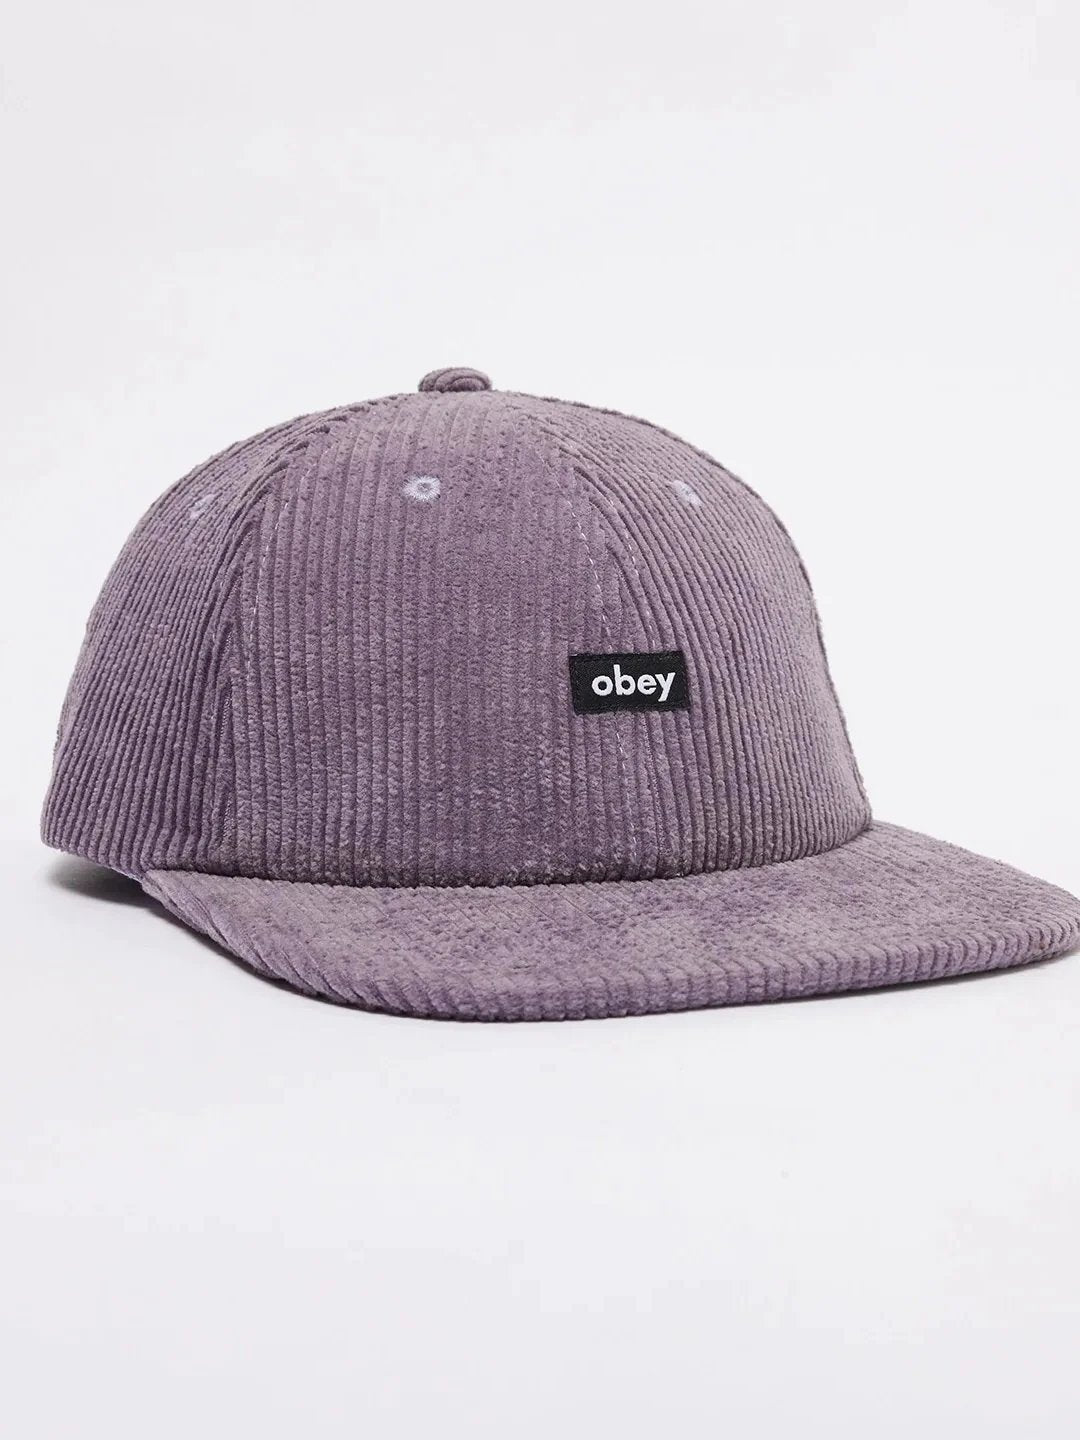 OBEY CORD LABEL 6 PANEL STRAPBACK WINEBERRY